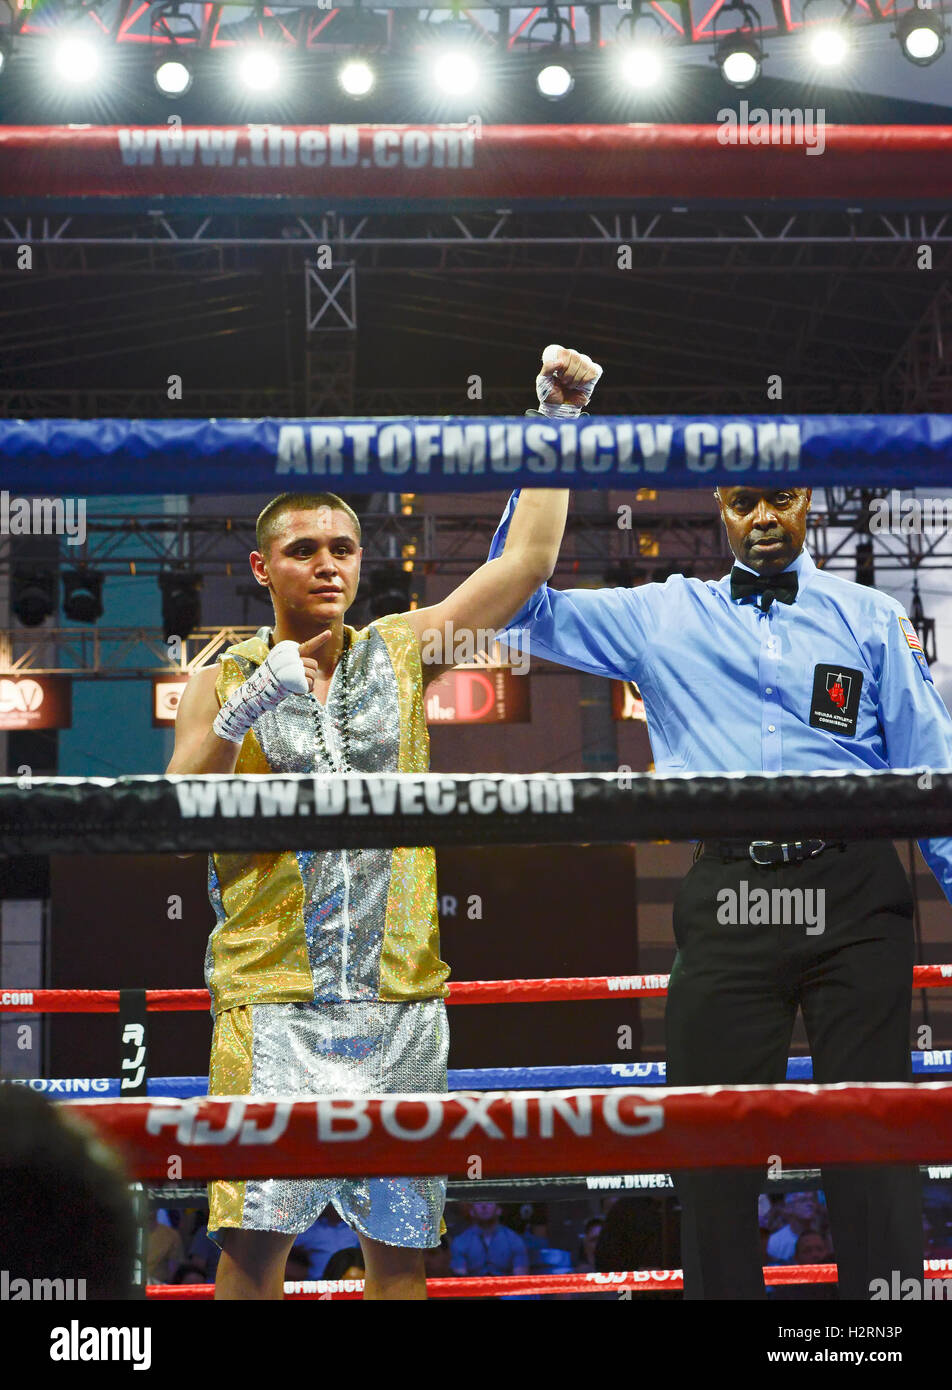 Las Vegas, Nevada September 30, 2016 -  Junior lightweight fighters Sal Lopez battles Kenneth 'Scrappy' Taylor for the win “Knockout Night at the D” series on friday night, presented by the D Las Vegas and DLVEC and promoted by Roy Jones Jr. Stock Photo